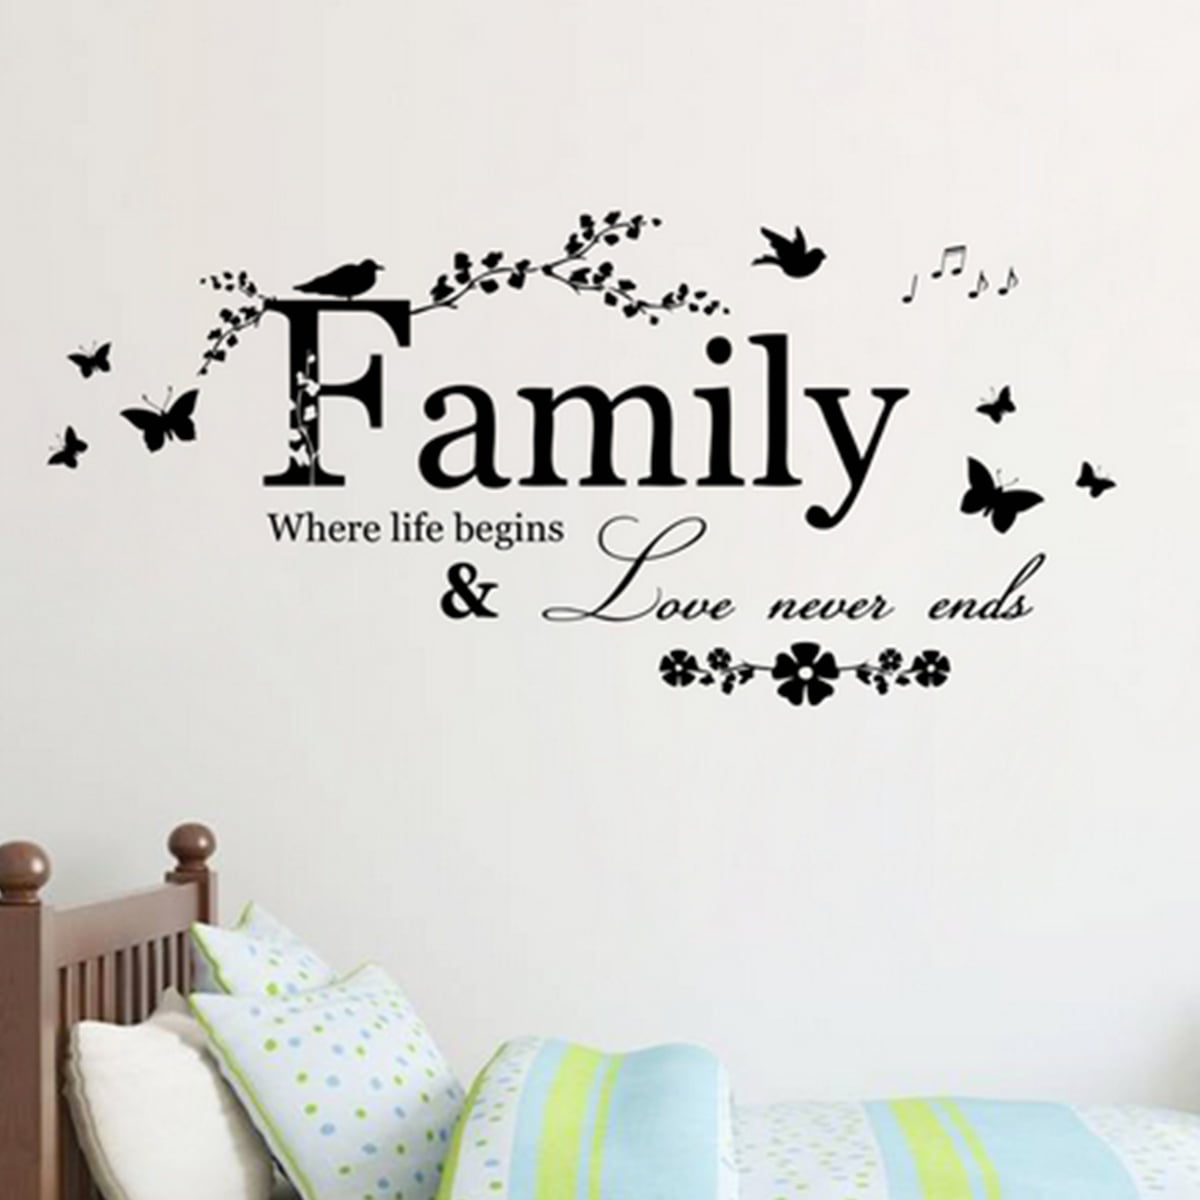 Removable Vinyl Art Quote Wall Decal Stickers Bedroom Mural DIY Home Room Decor 